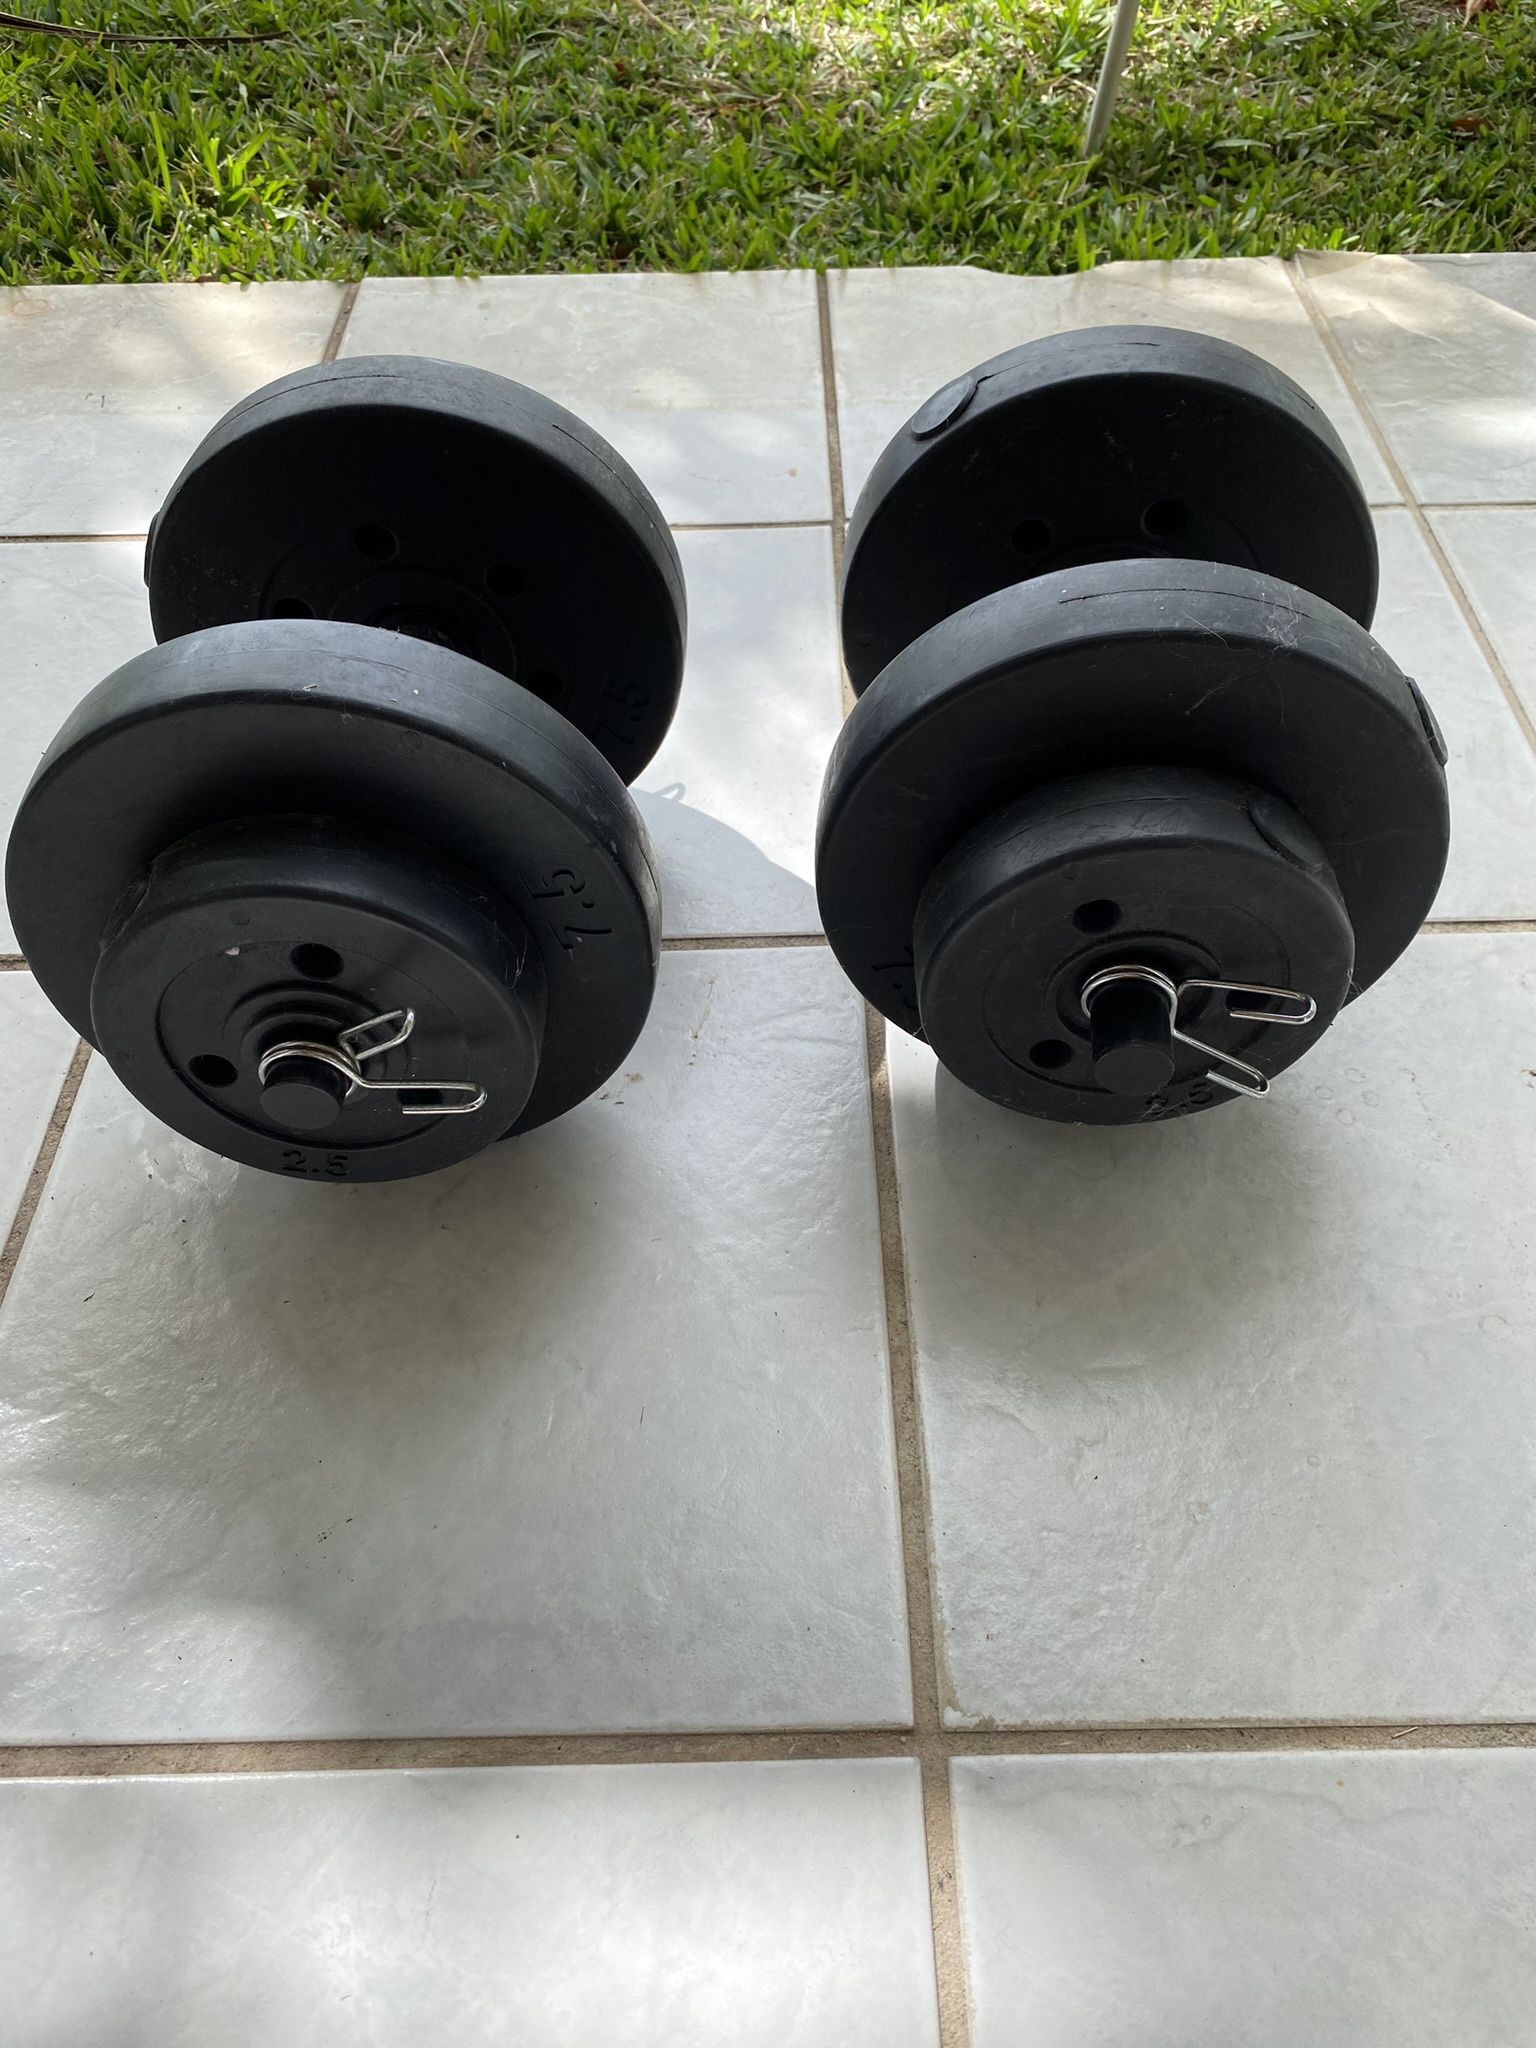 25 Lb Set of Weights!  Only $1 Per Pound. 